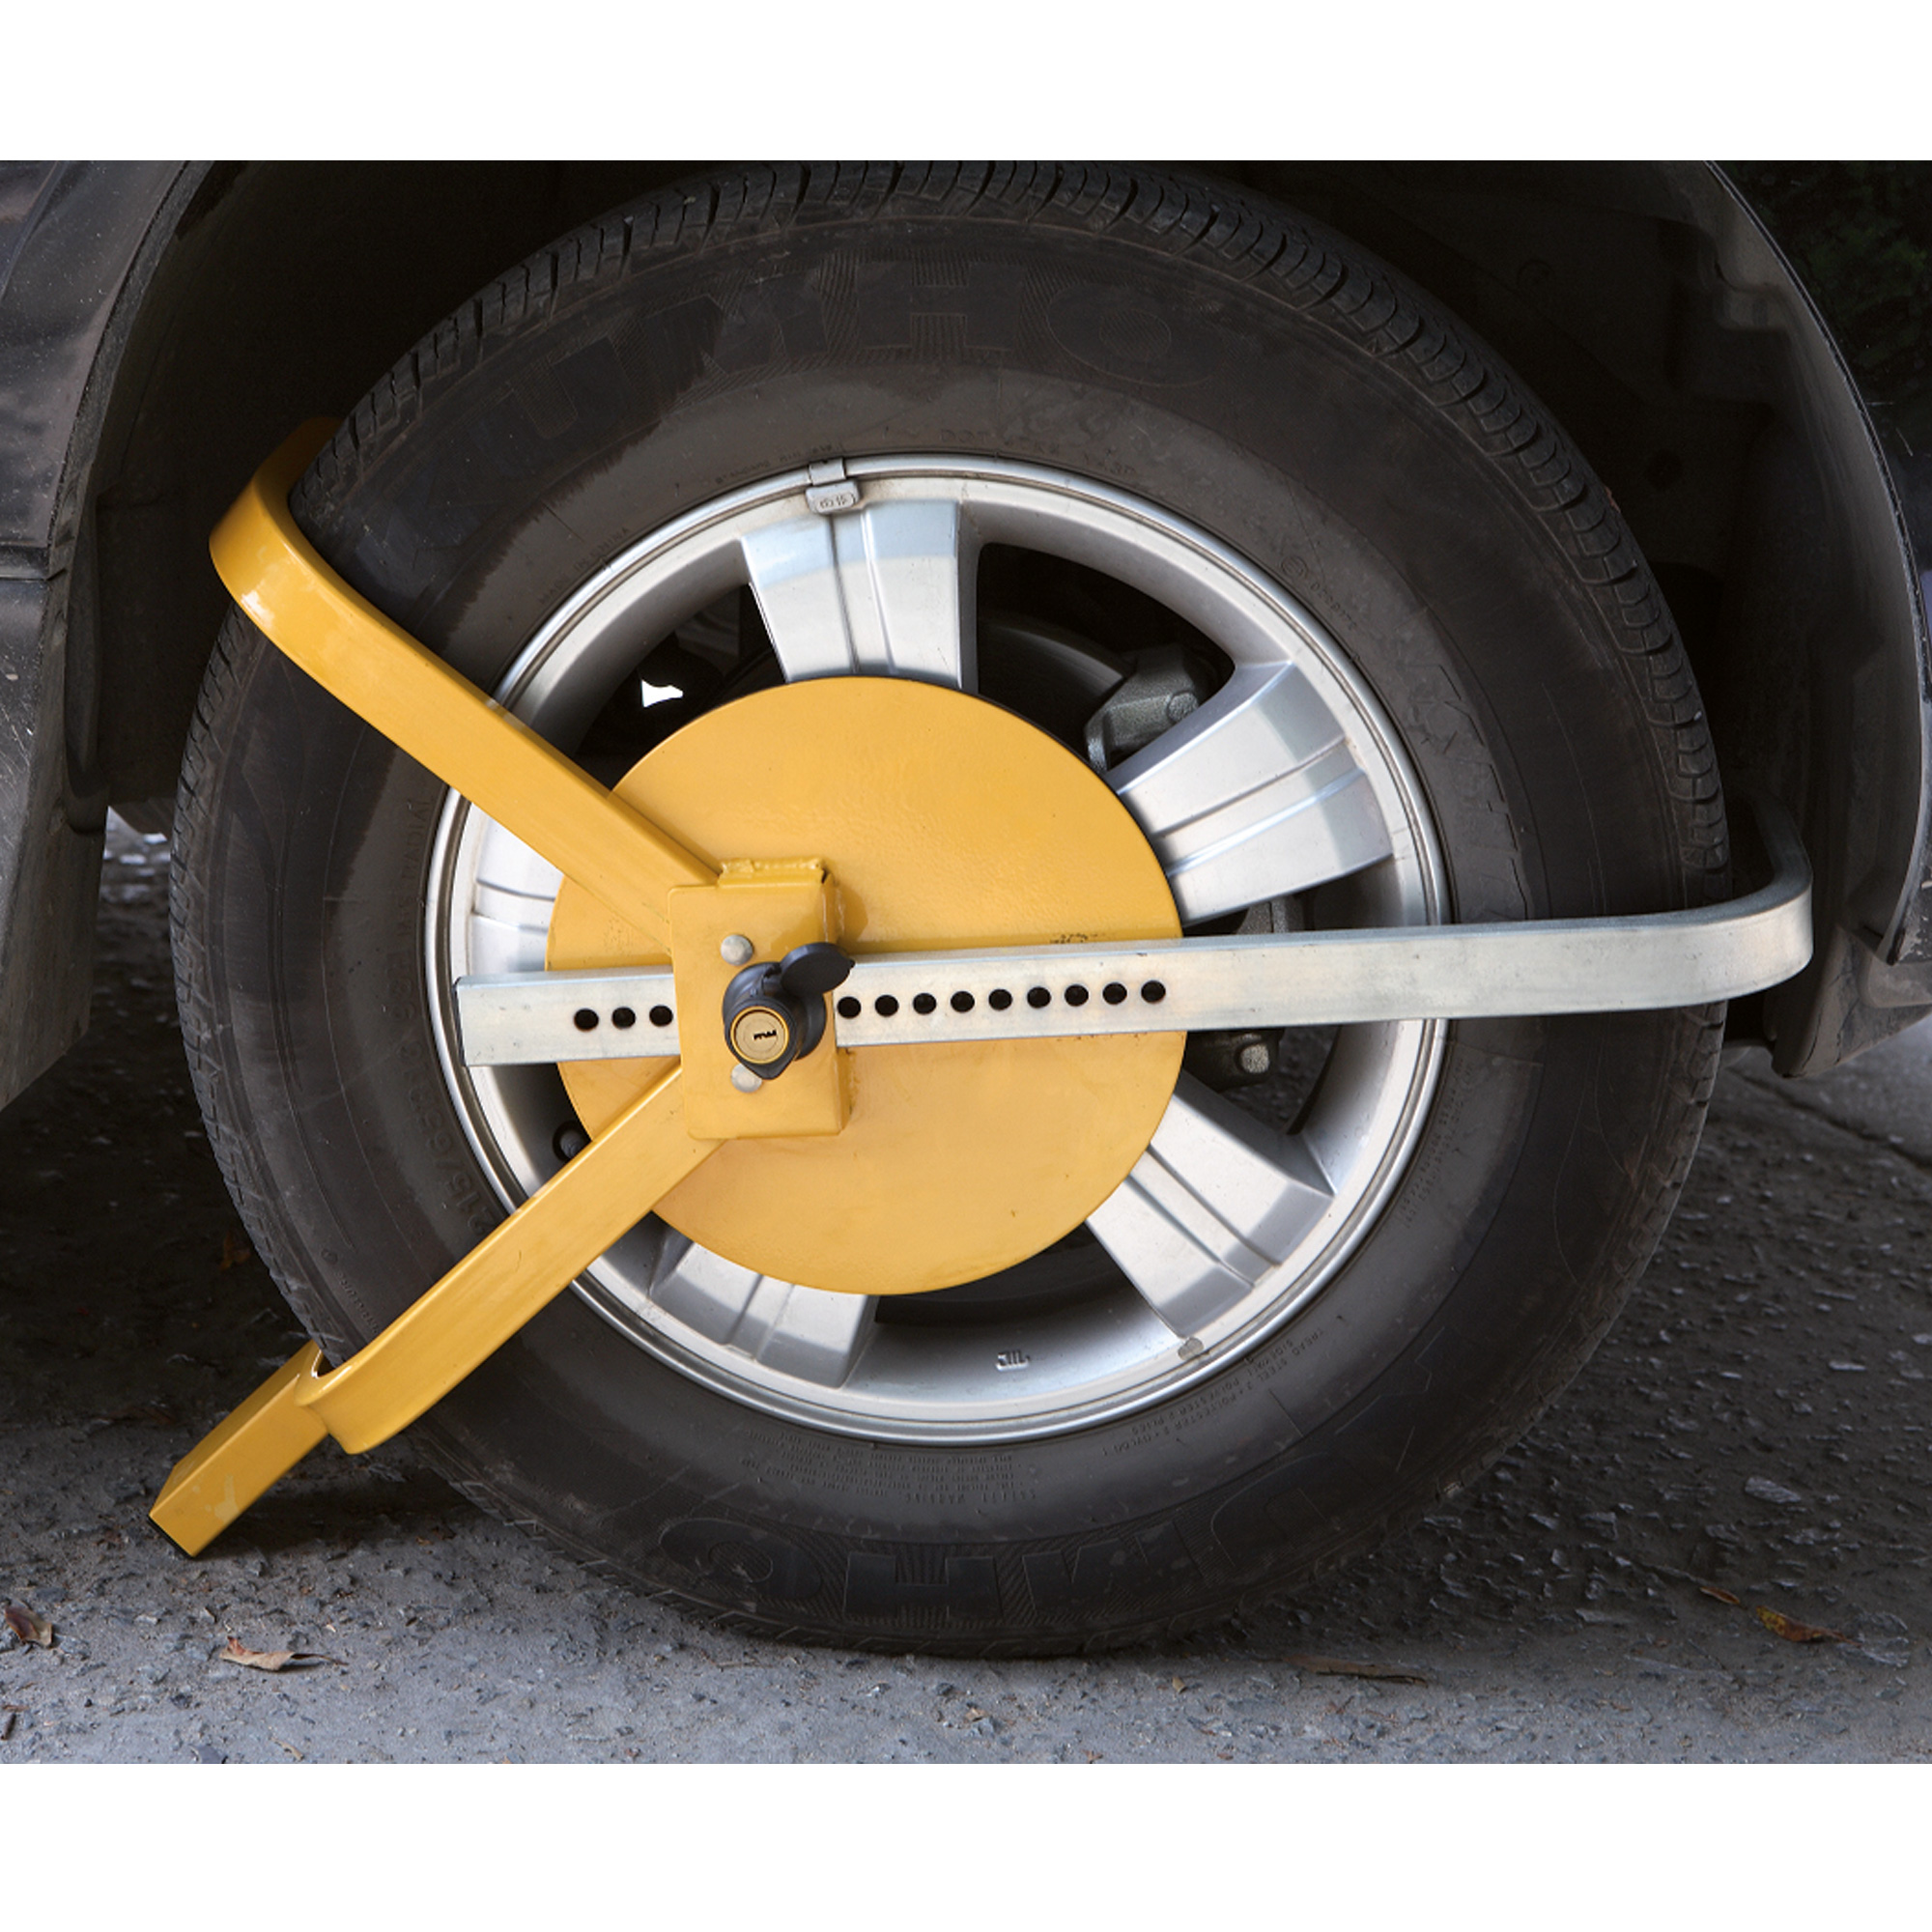 Wheel Clamp  purchase online